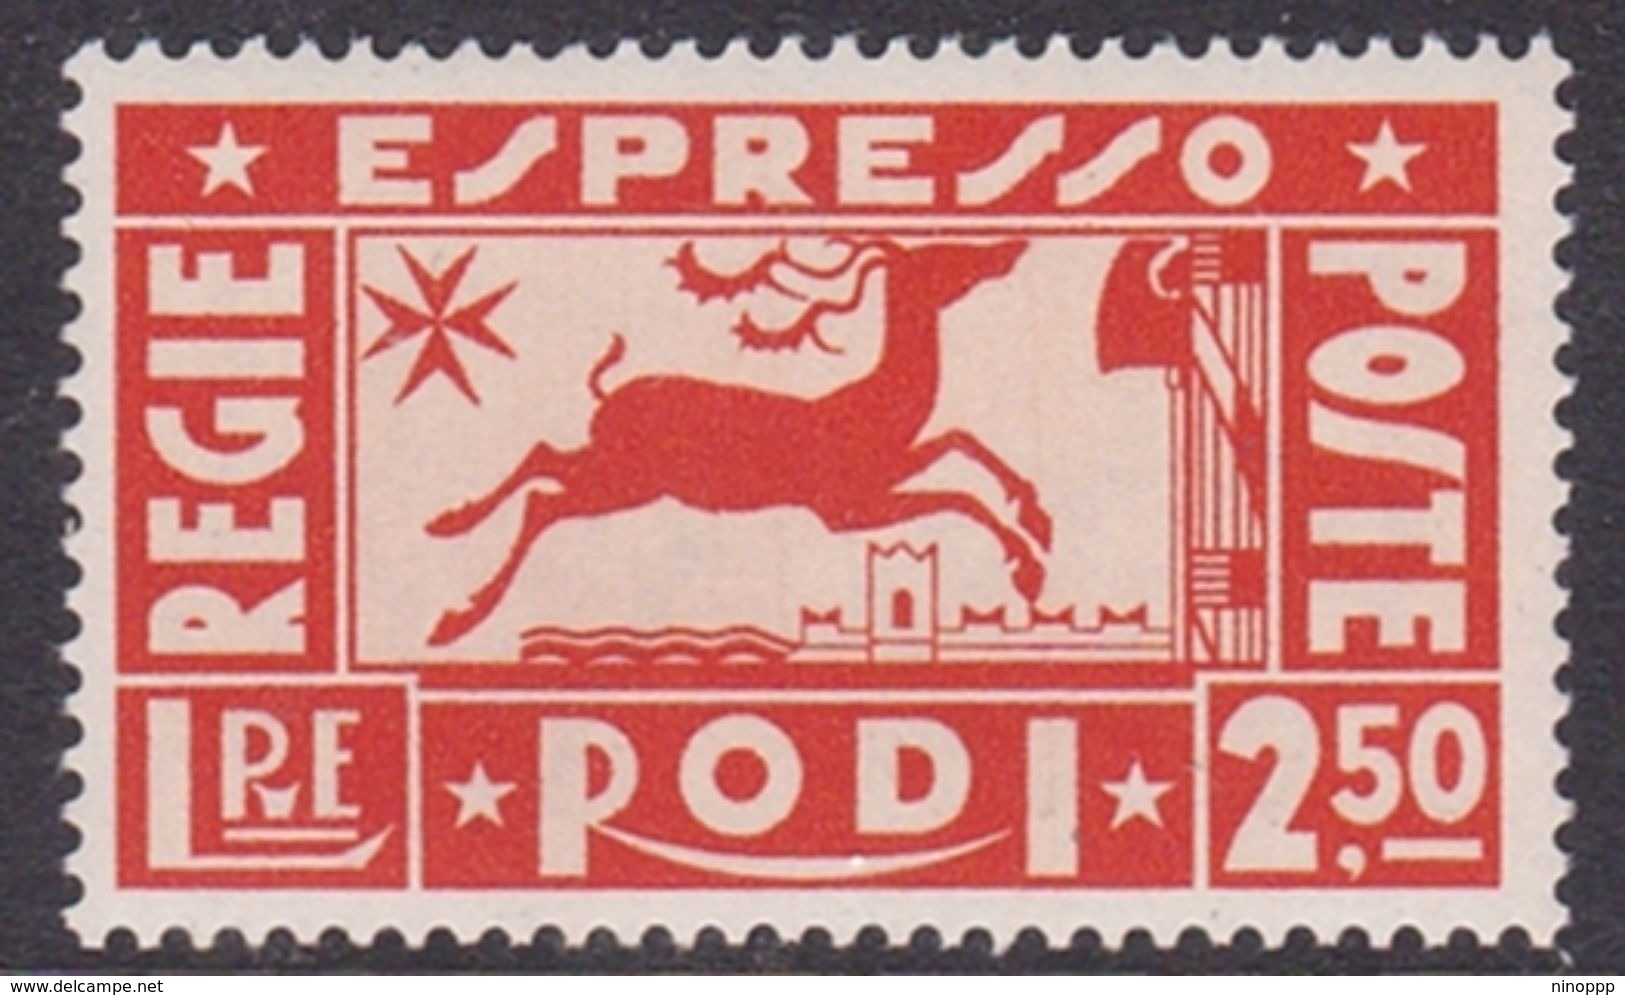 Italy-Colonies And Territories-Aegean General Issue-Rodi Special Delivery Stamp S2 1936 Deer,lire 2,50 Orange MH - Emissions Générales